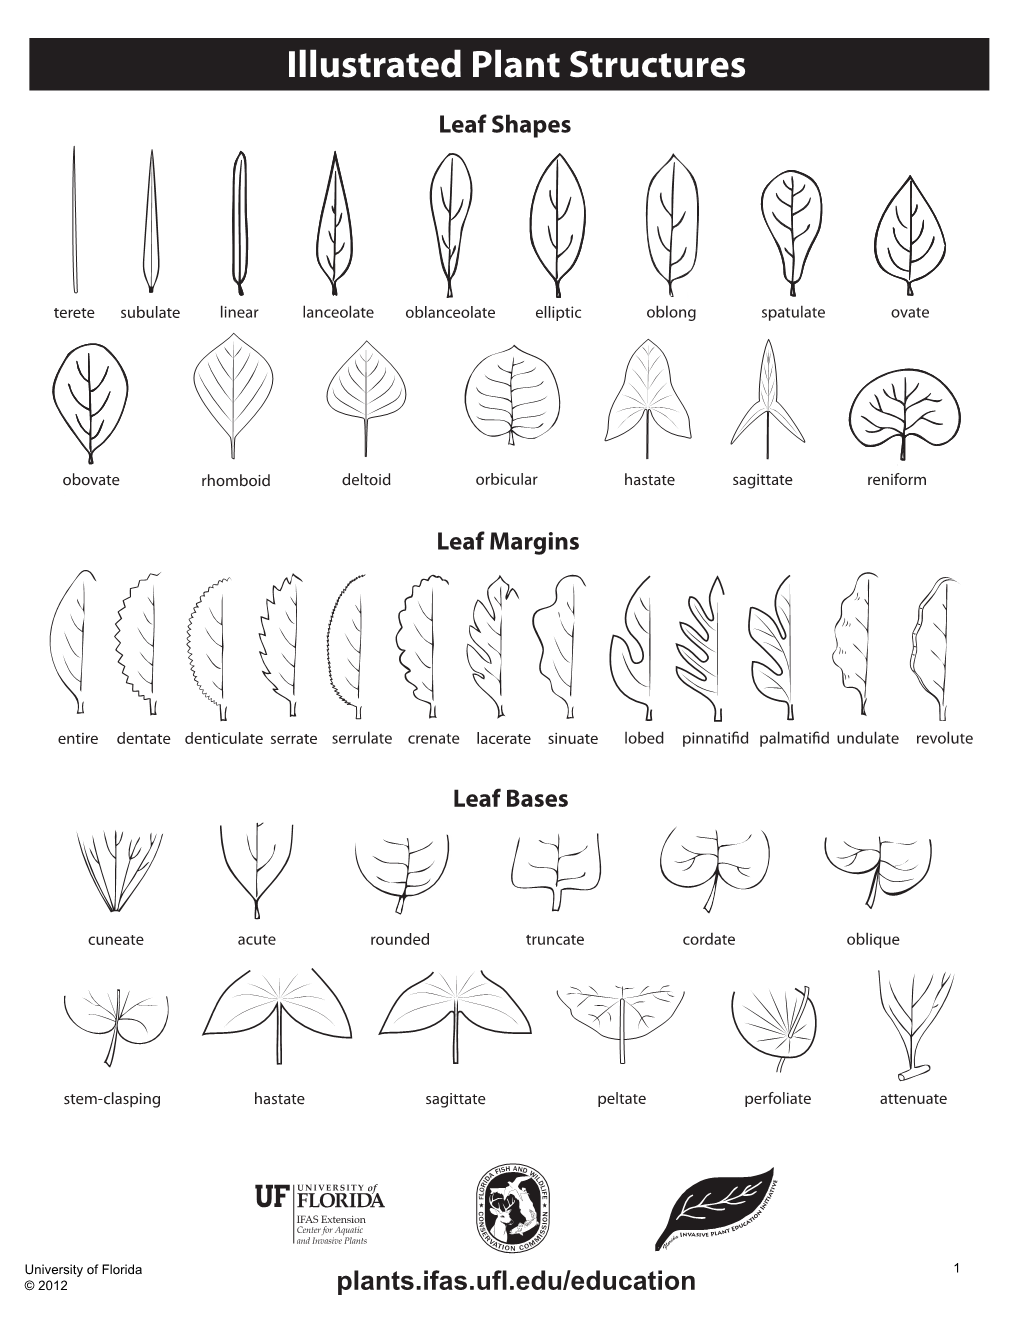 Illustrated Plant Structures